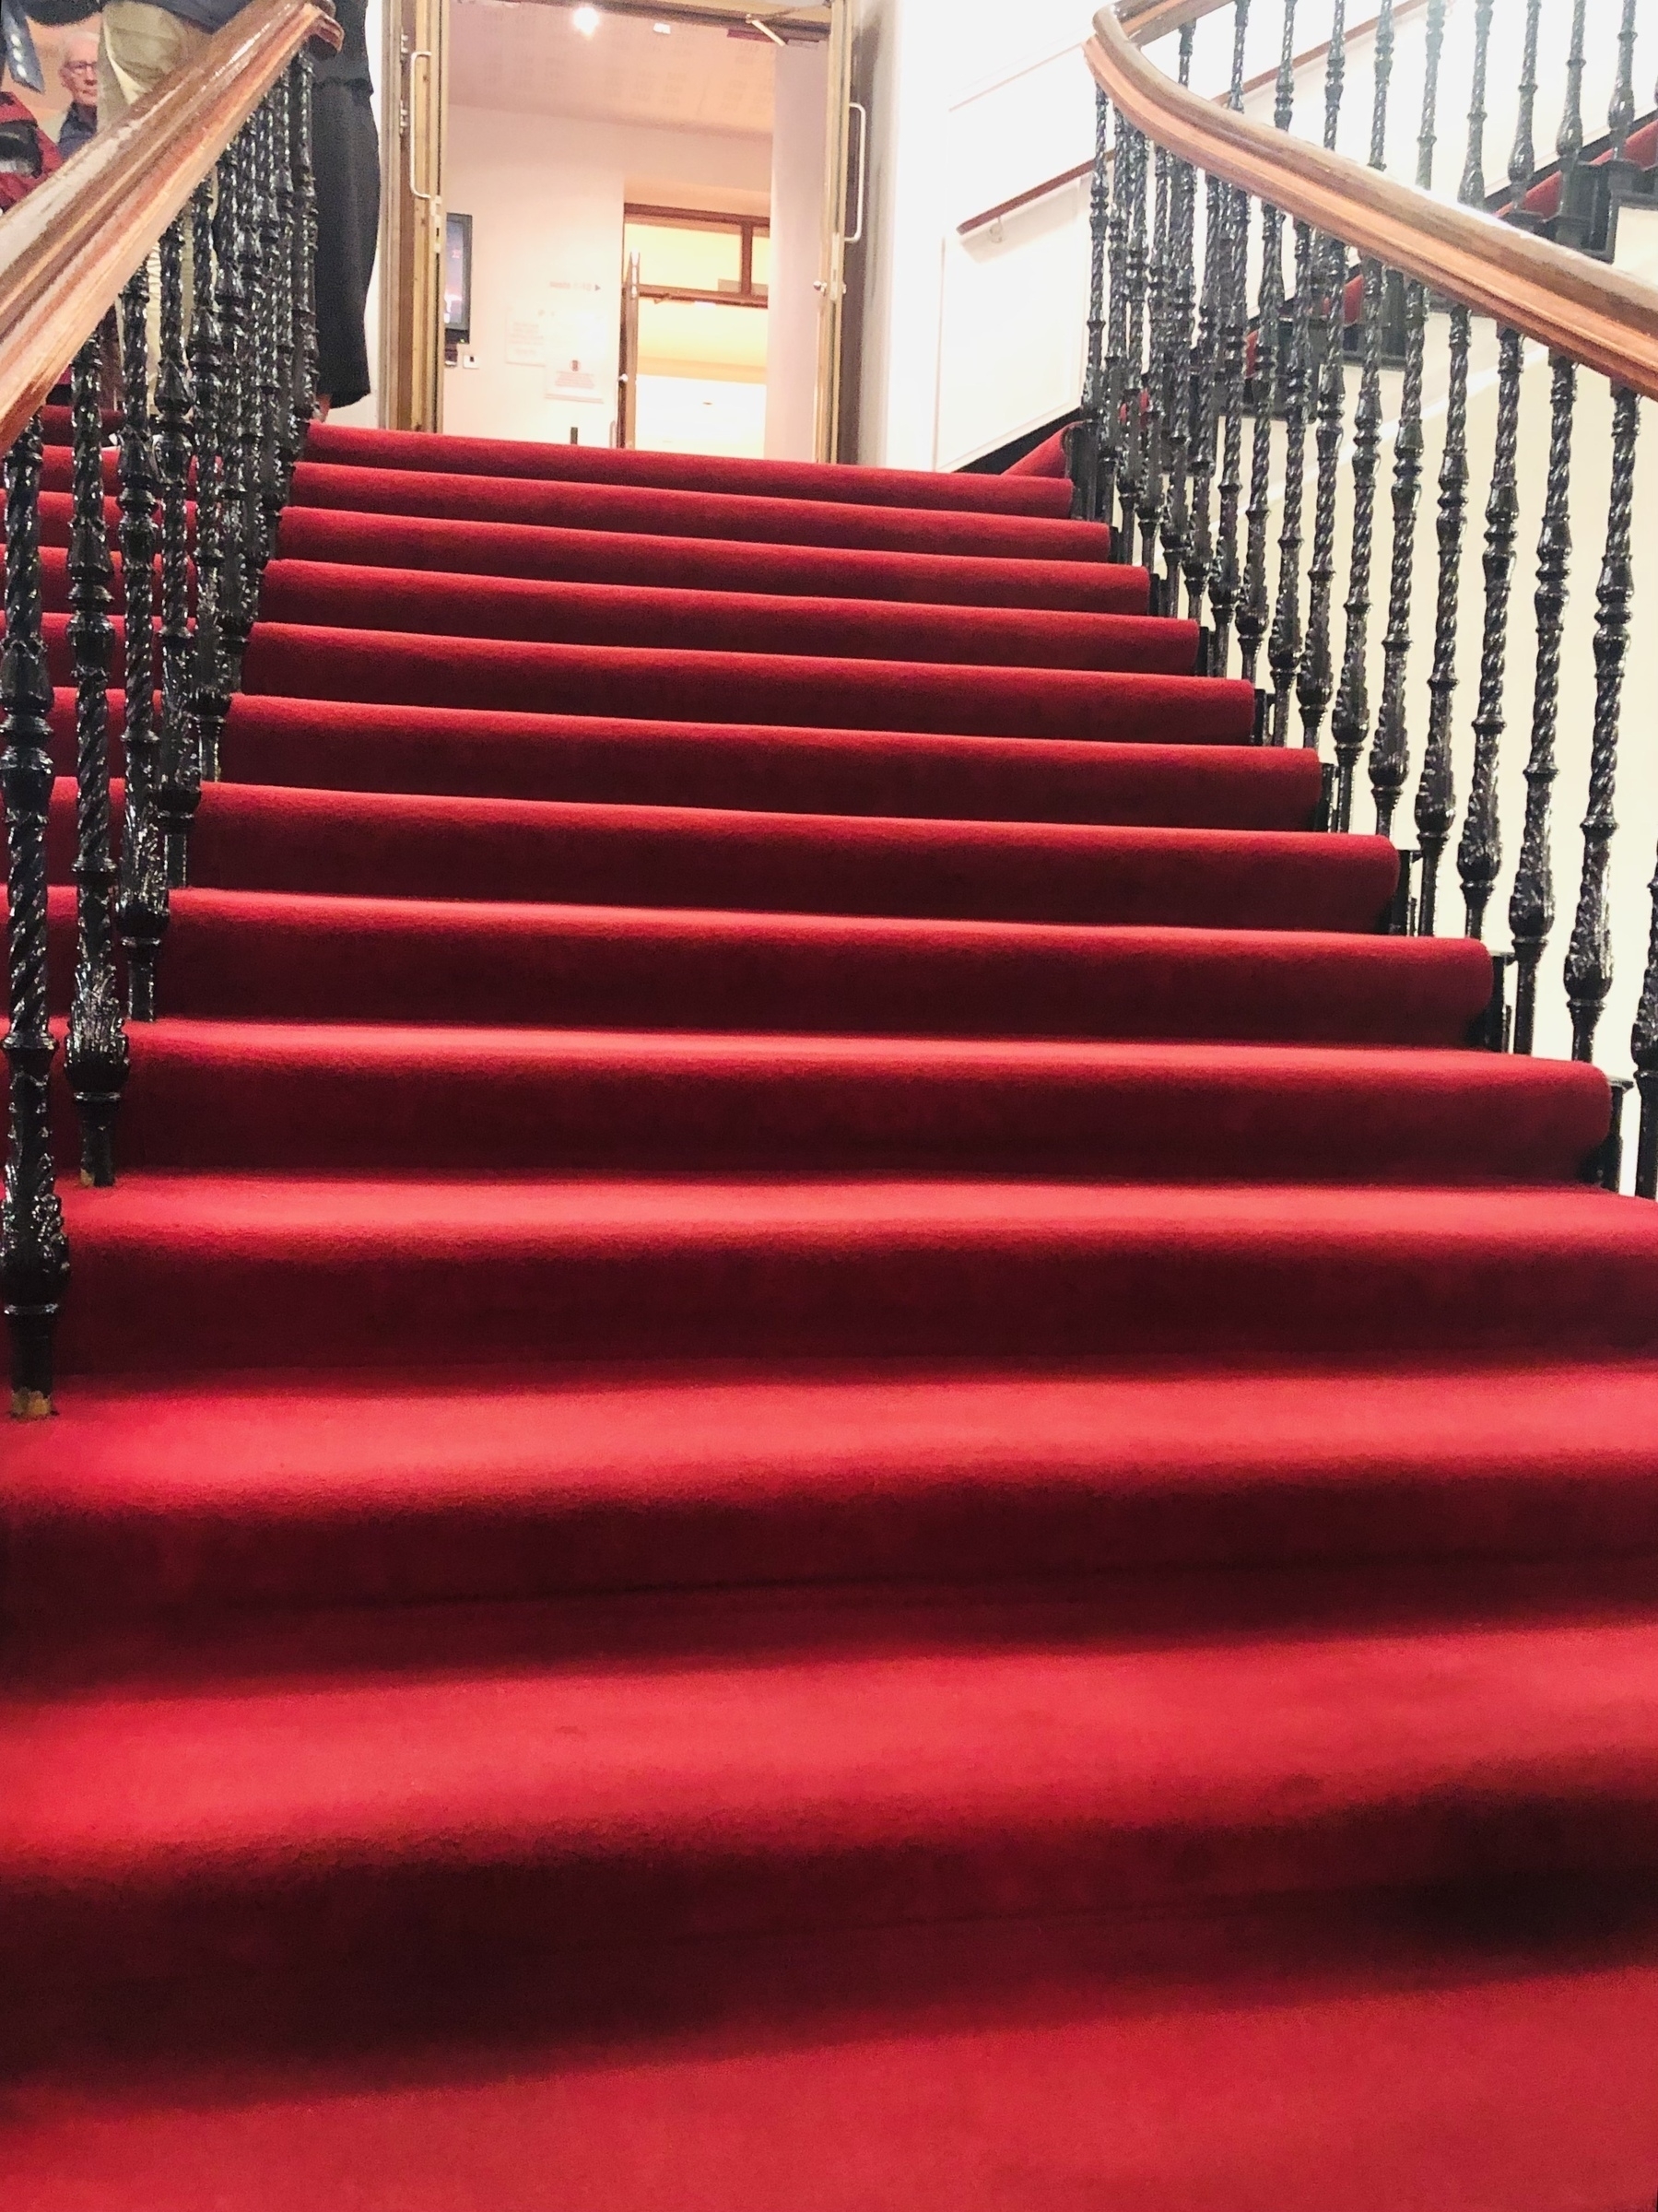 Ascending, grand red carpet of stairs with a wooden balustrade and black iron railings. 